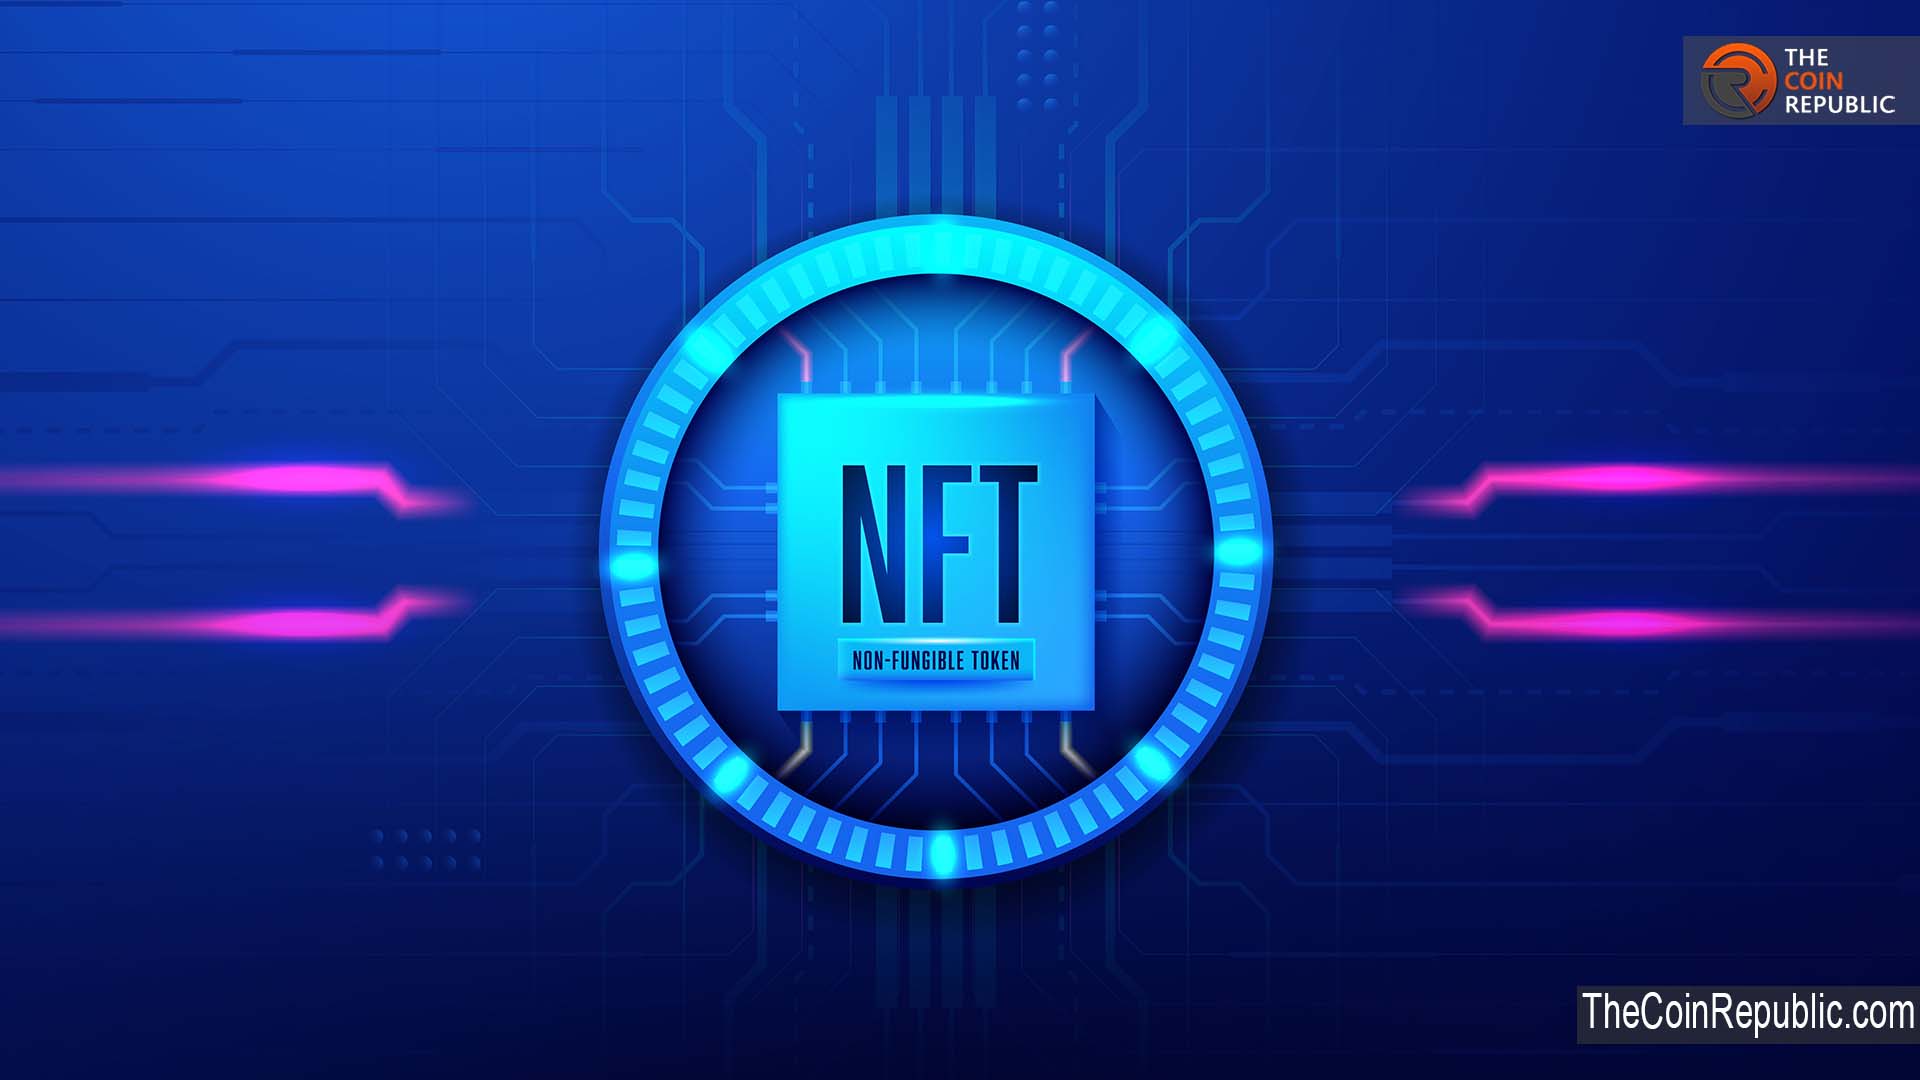 is-telegram-founder-planning-to-integrate-nfts-the-coin-republic-cryptocurrency-bitcoin-ethereum-and-amp-blockchain-news